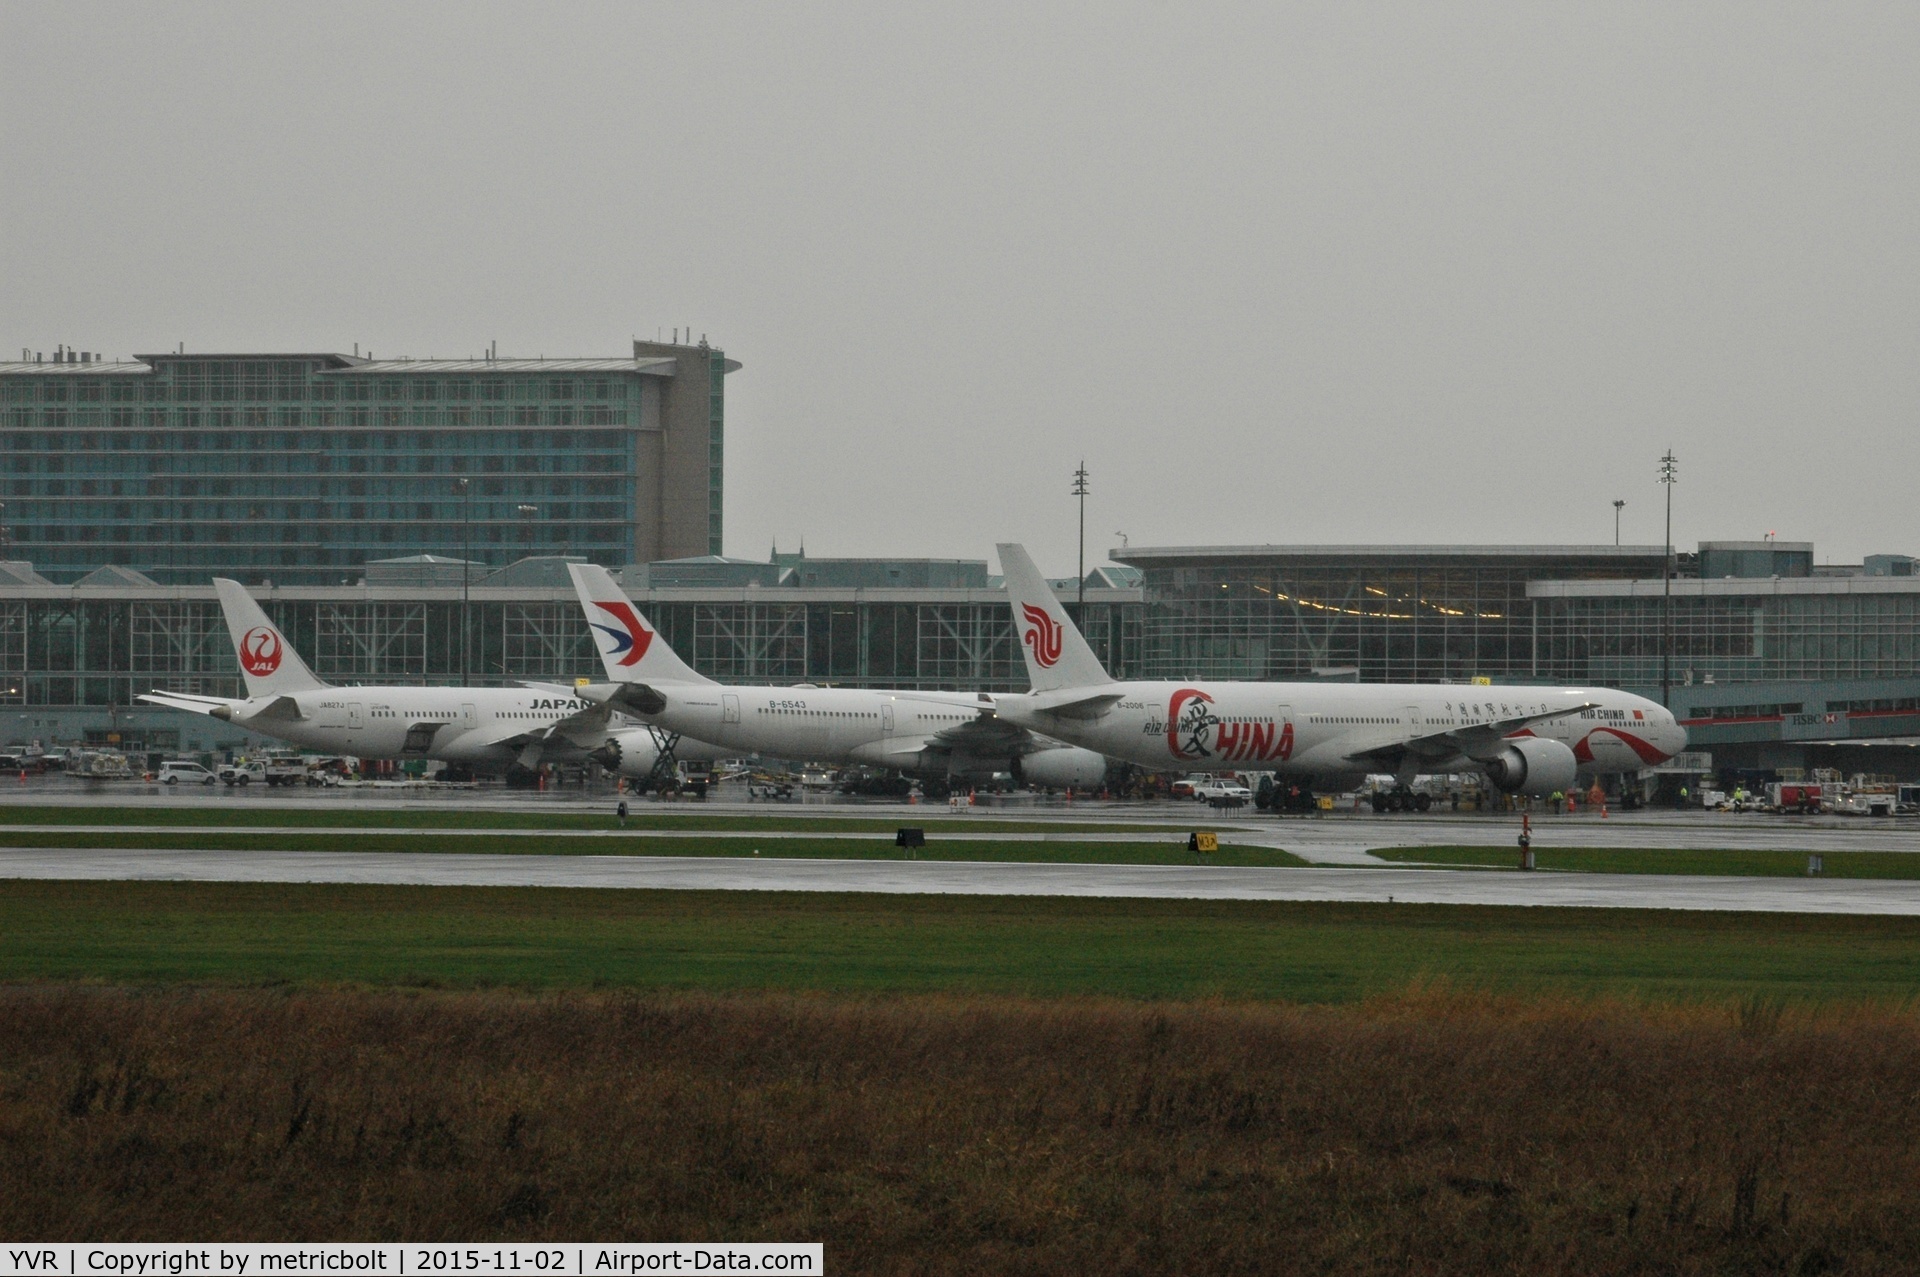 Vancouver International Airport, Vancouver, British Columbia Canada (YVR) - Rainy day arrivals in Vancouver